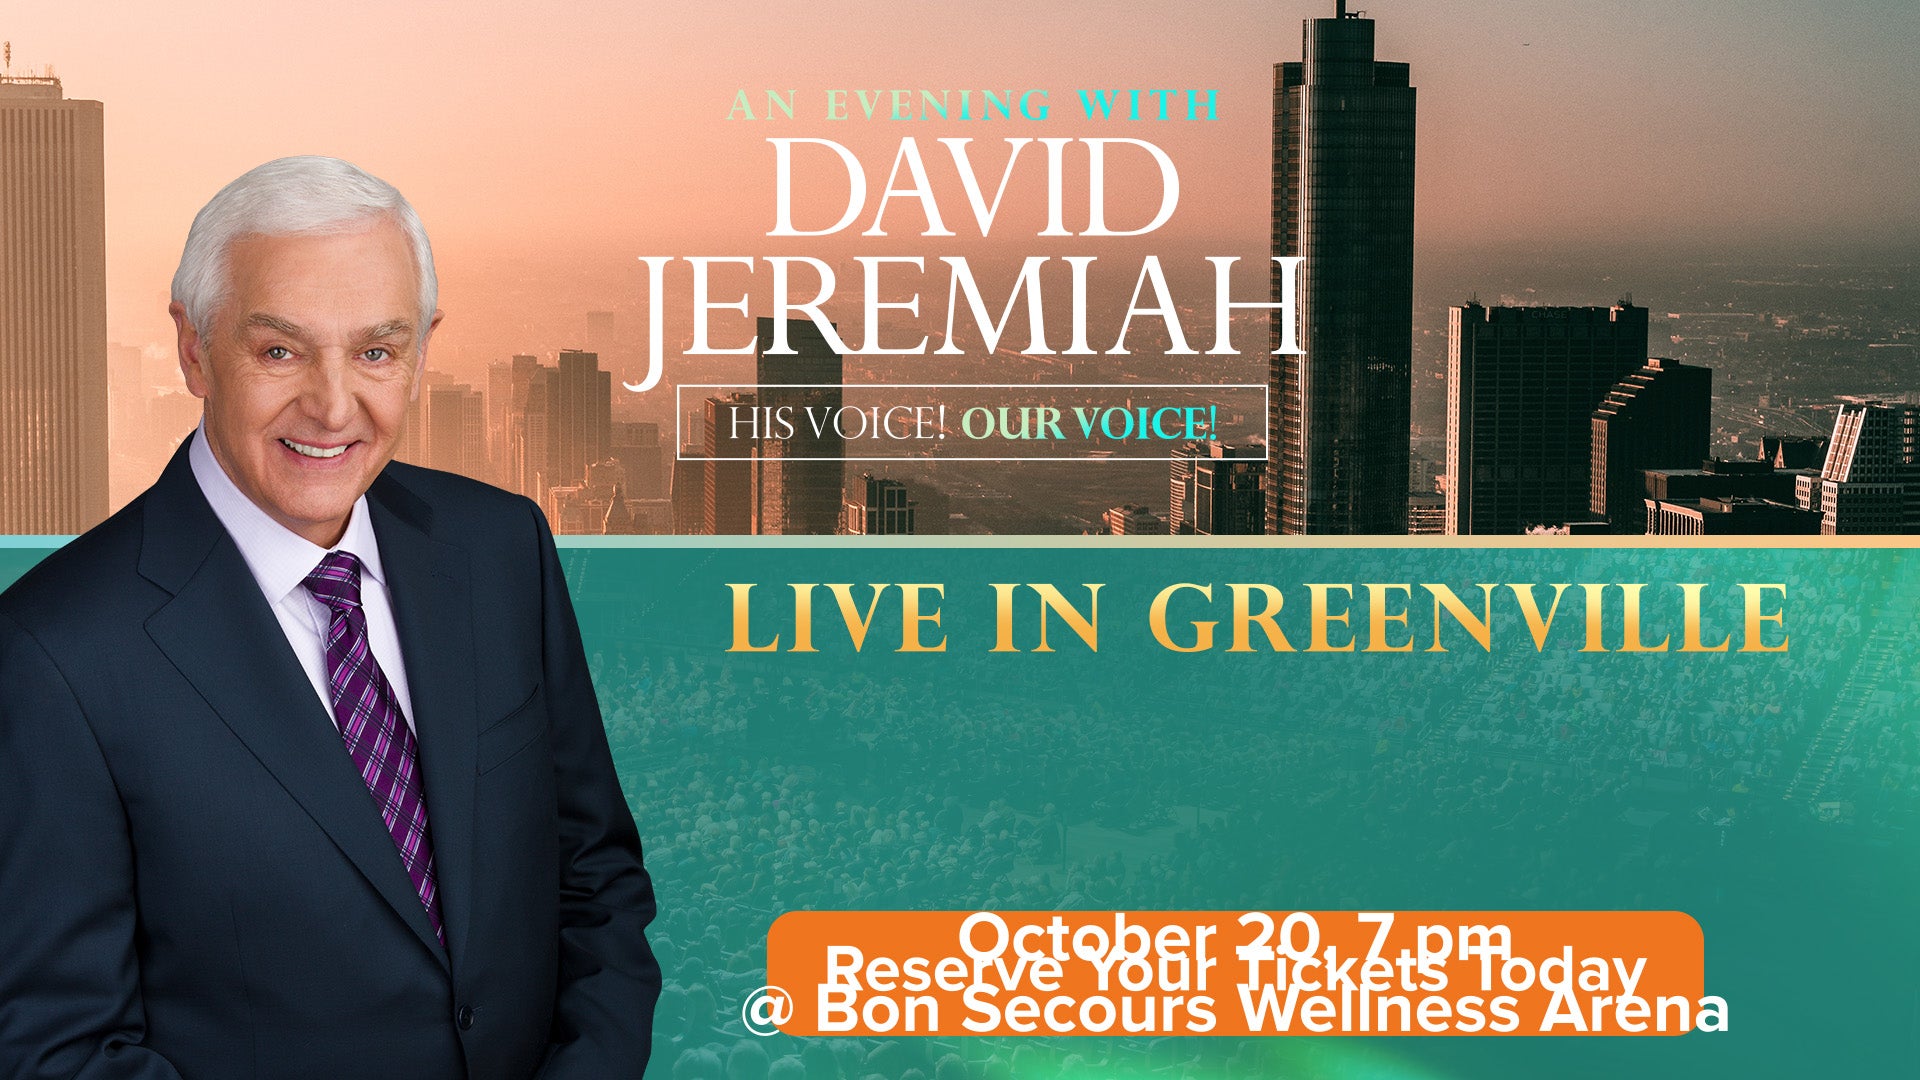 An Evening With David Jeremiah HIS VOICE! OUR VOICE